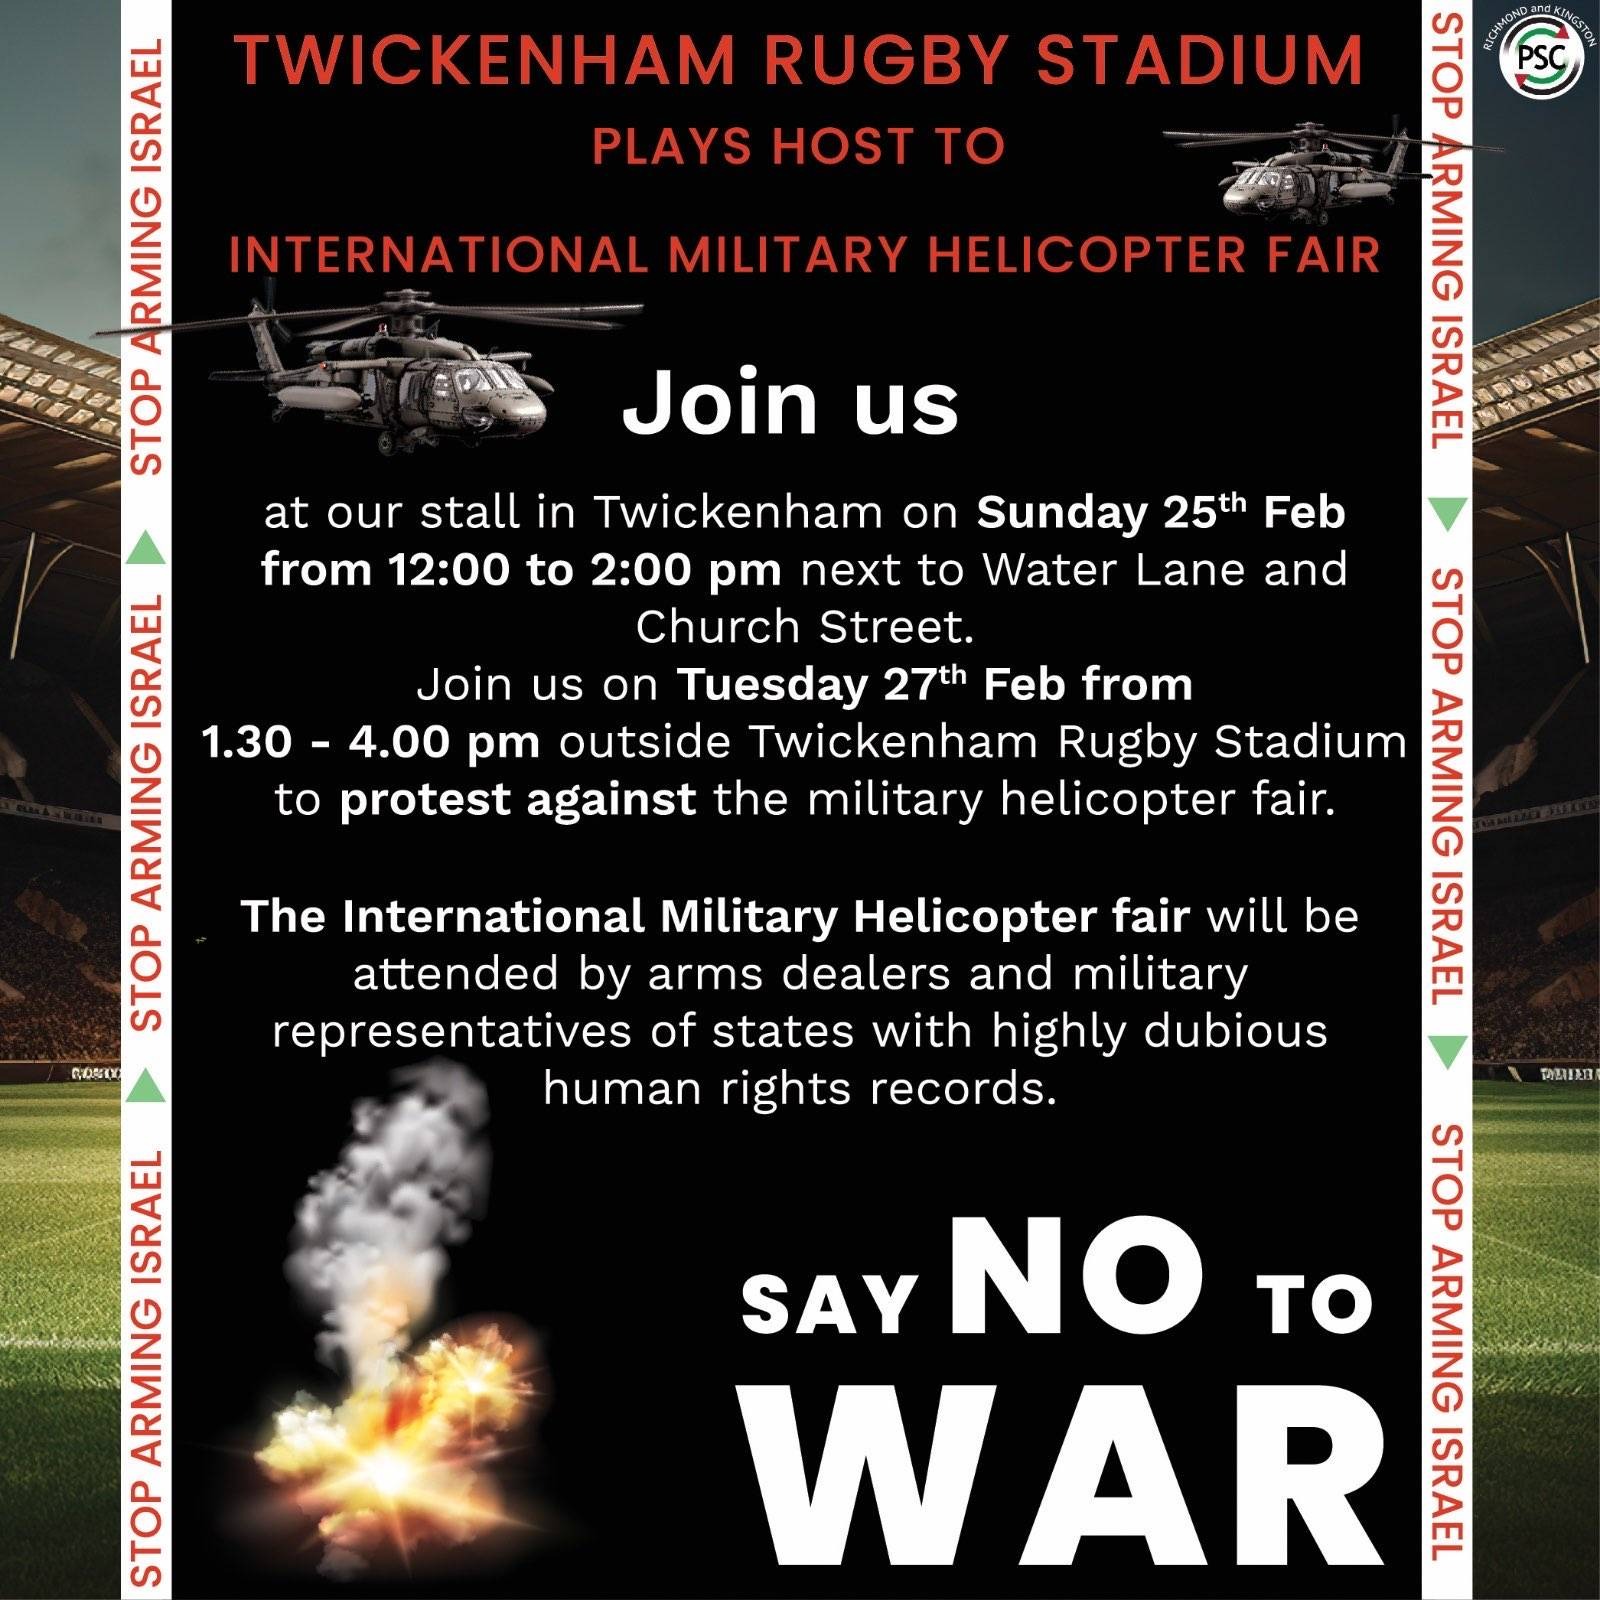 “Twickenham Stadium Plays Host to International Military Helicopter Fair  Join us  Tuesday 27th Feb from 1.30pm to 4.00pm outside Twickenham Rugby Stadium to protest against MILITARY HELICOPTER FAIR  Since early October every week the Israeli military has killed as many kids as are in the whole of Chase Bridge School. Every Single Week.  600+ representatives from 50 countries will be attending this second arms fair”  You are also invited to join campaigners on a stall Sunday 25th Feb from 12-2pm next to Water Lane and Church Street in Twickenham.